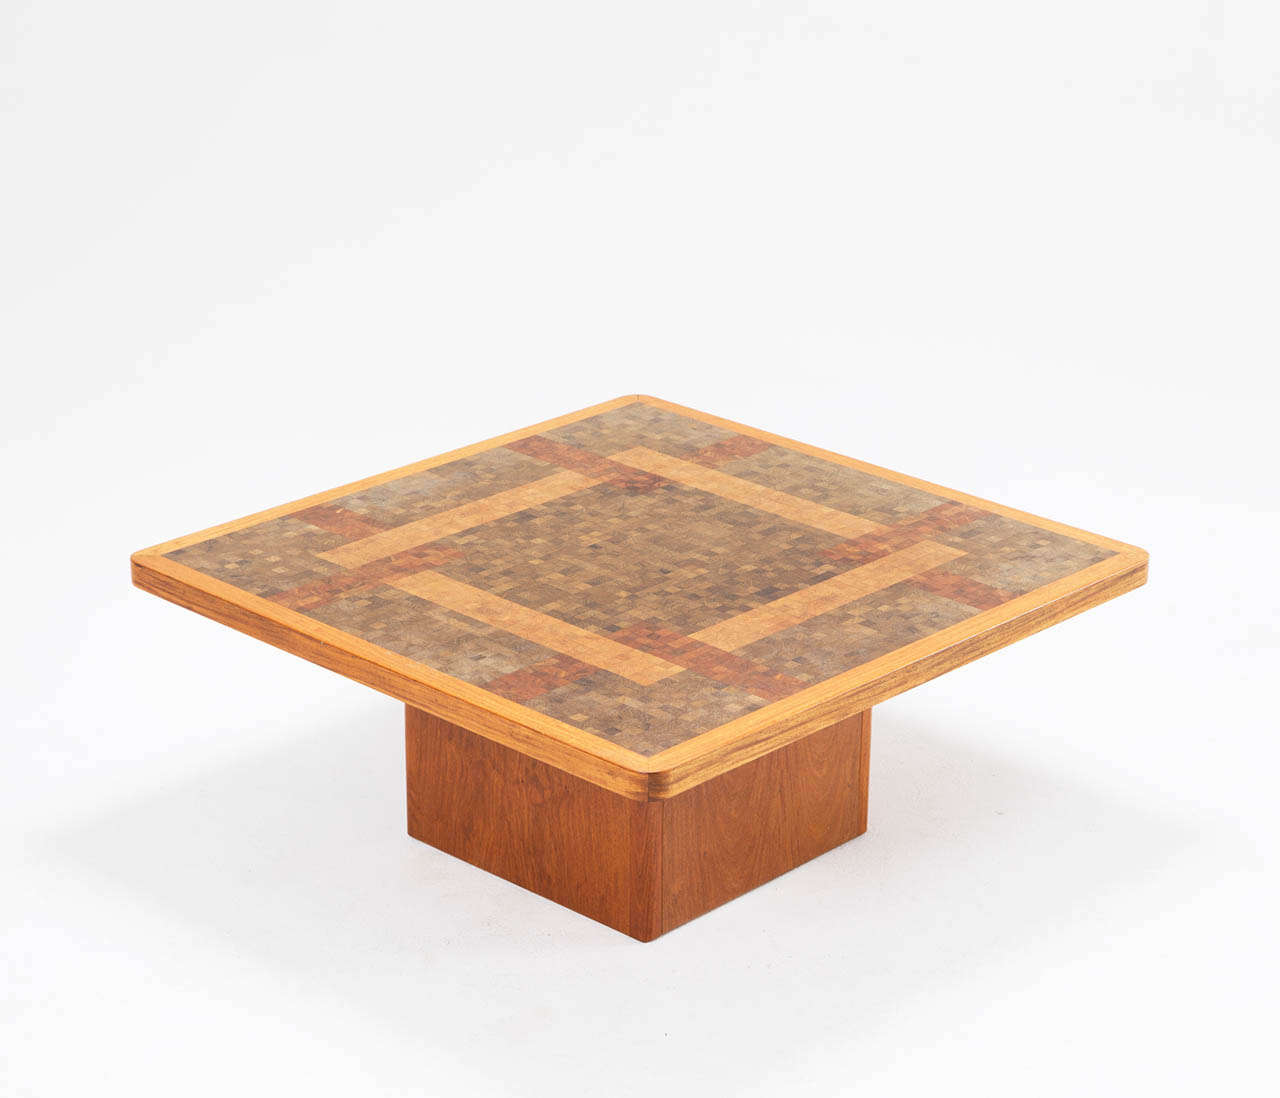 Very tight designed coffeetable by Rolf Middelboe with a bitmap structured table top, made of cubical solid pieces of wood. All combined to create an interesting structure and pattern.

Solid wenge frame with several wood cubes such as, wenge, oak,